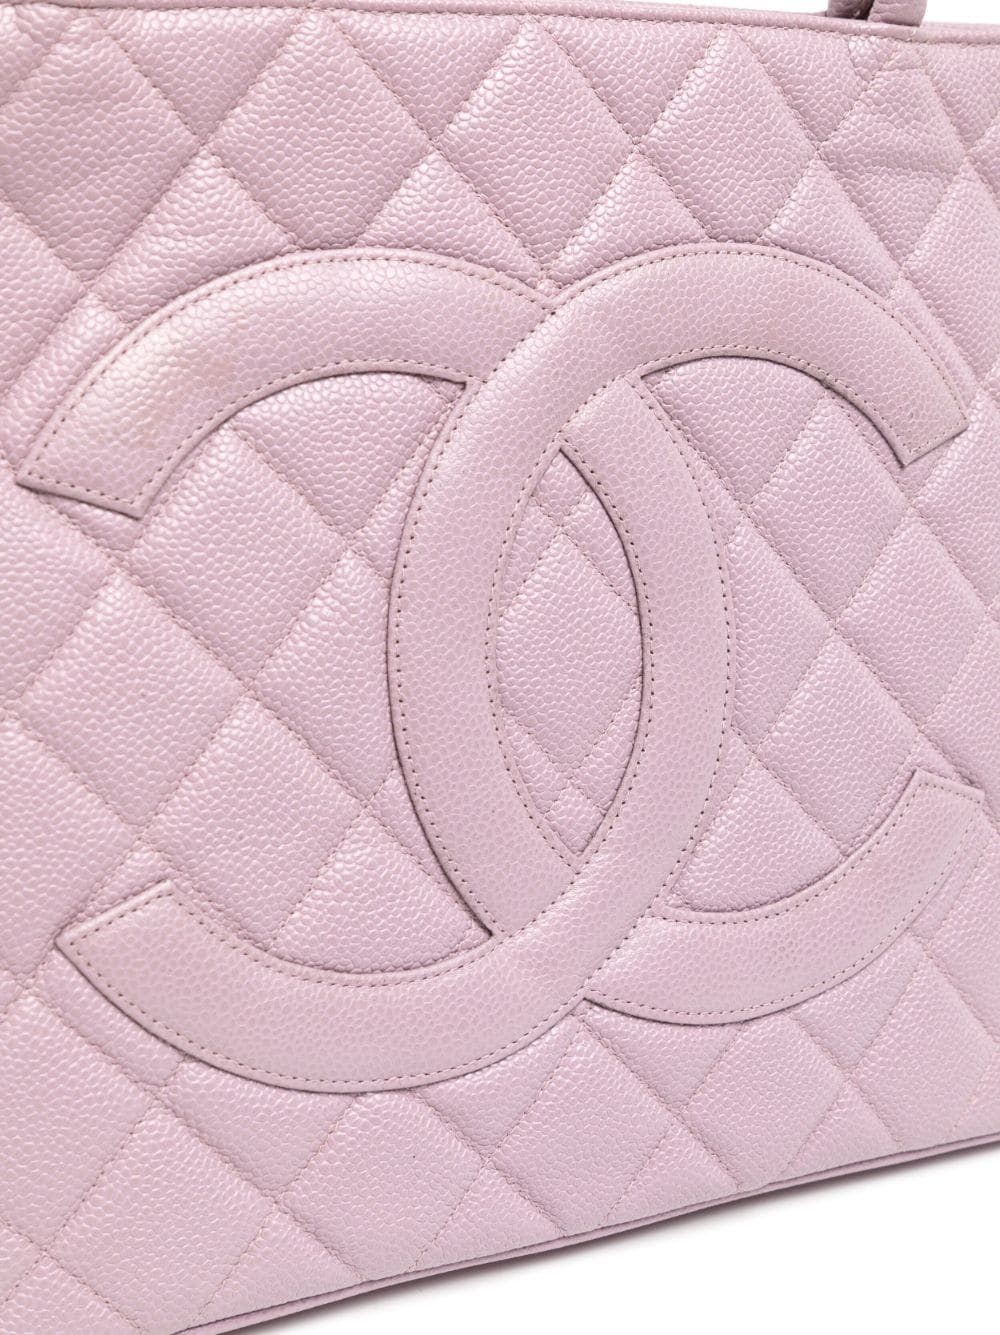 CHANEL Pre-Owned 2000-2002 Medallion Tote Bag - Farfetch